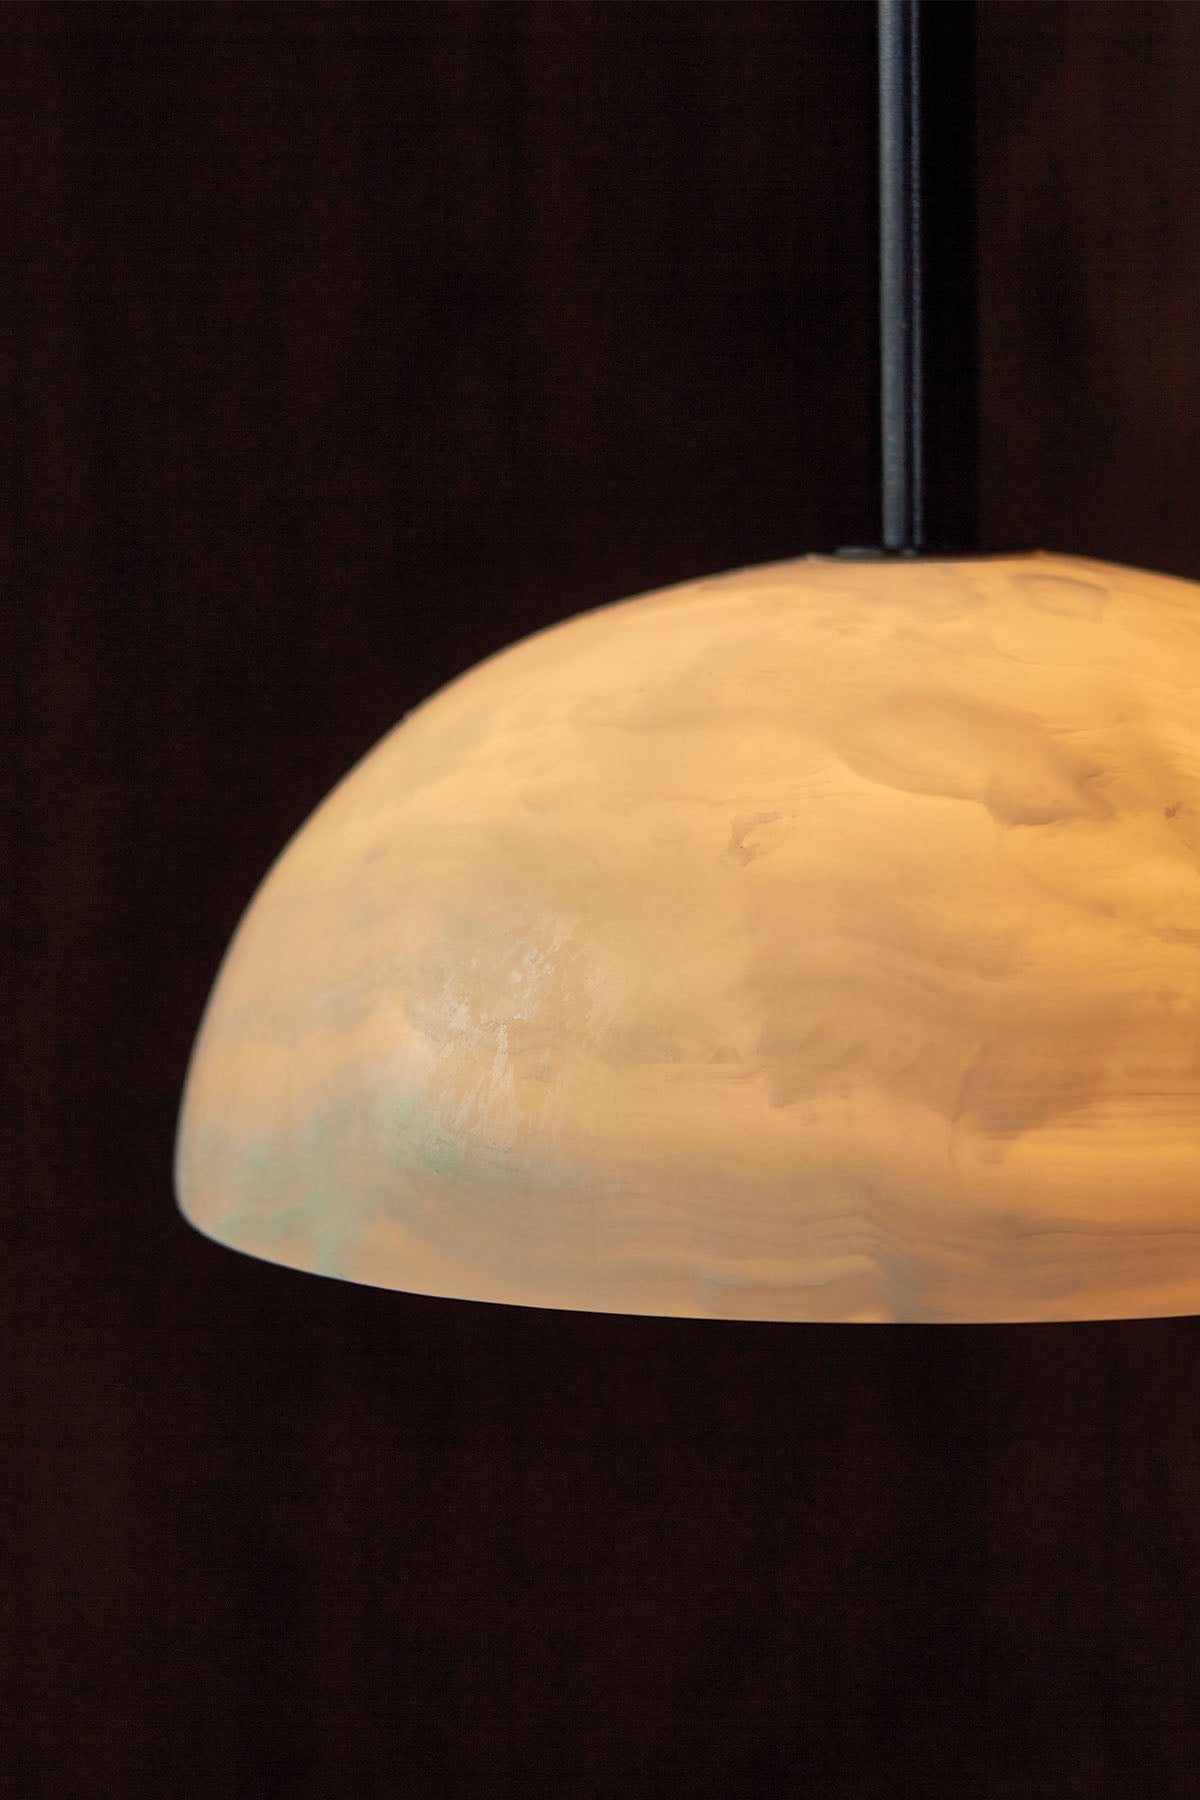 Aurelia Pendant Light, in White Onyx and Brushed Black. Image by Lawrence Furzey.